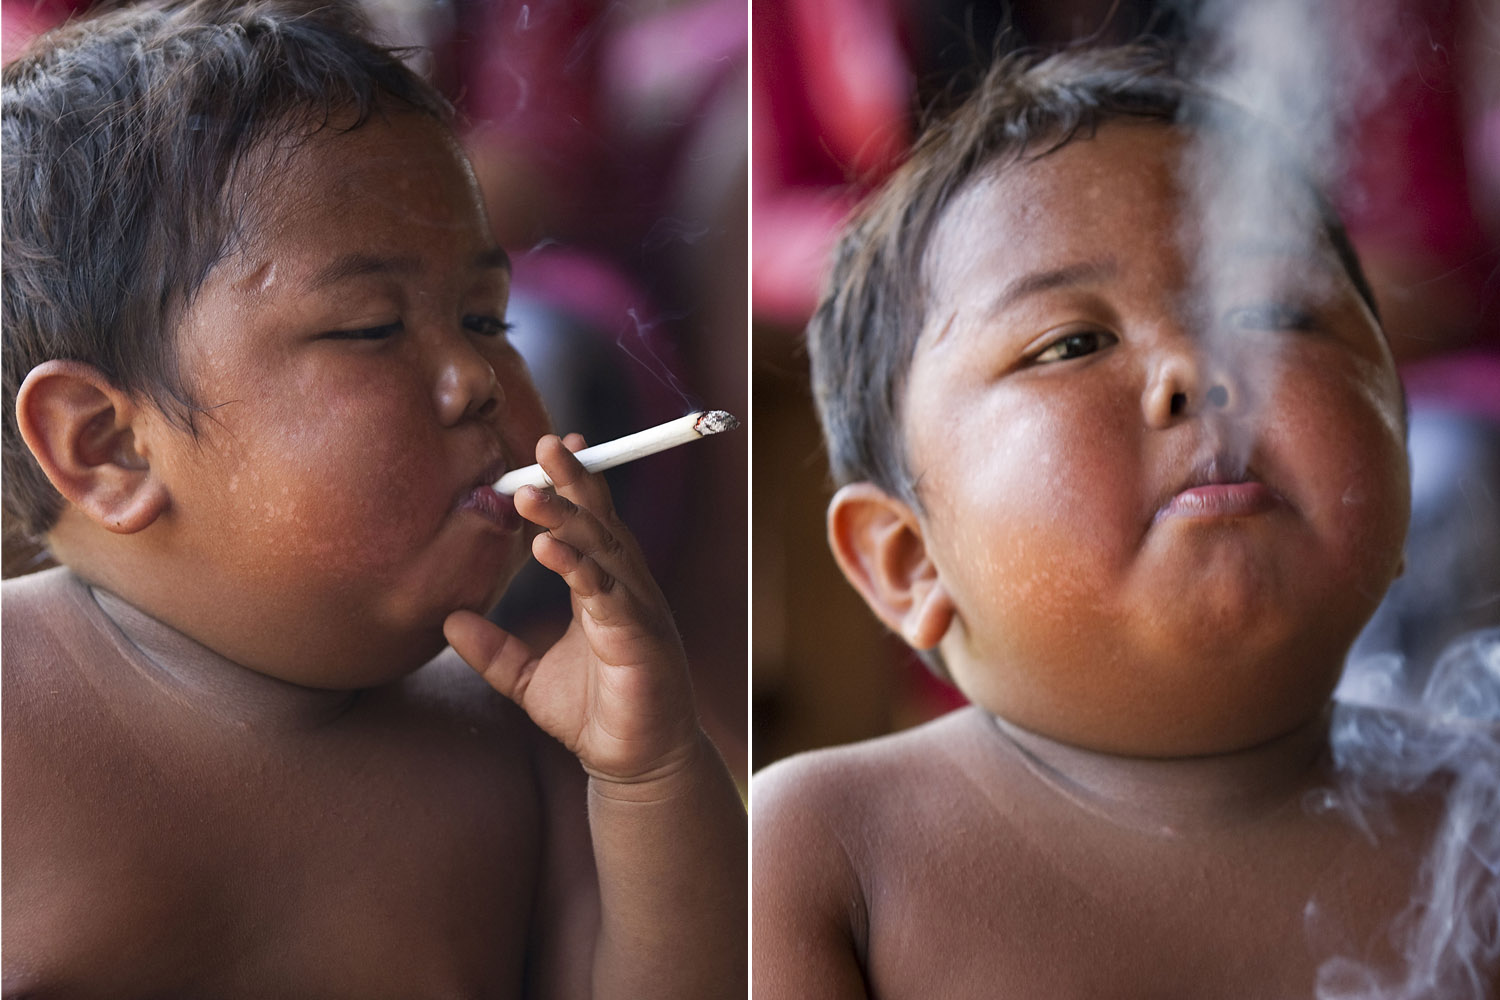 The 100 billion dollar tobacco industry in Indonesia is virtually unregulated. With grade school aged children as a prime target, it is common for males to start smoking as early as age 6.